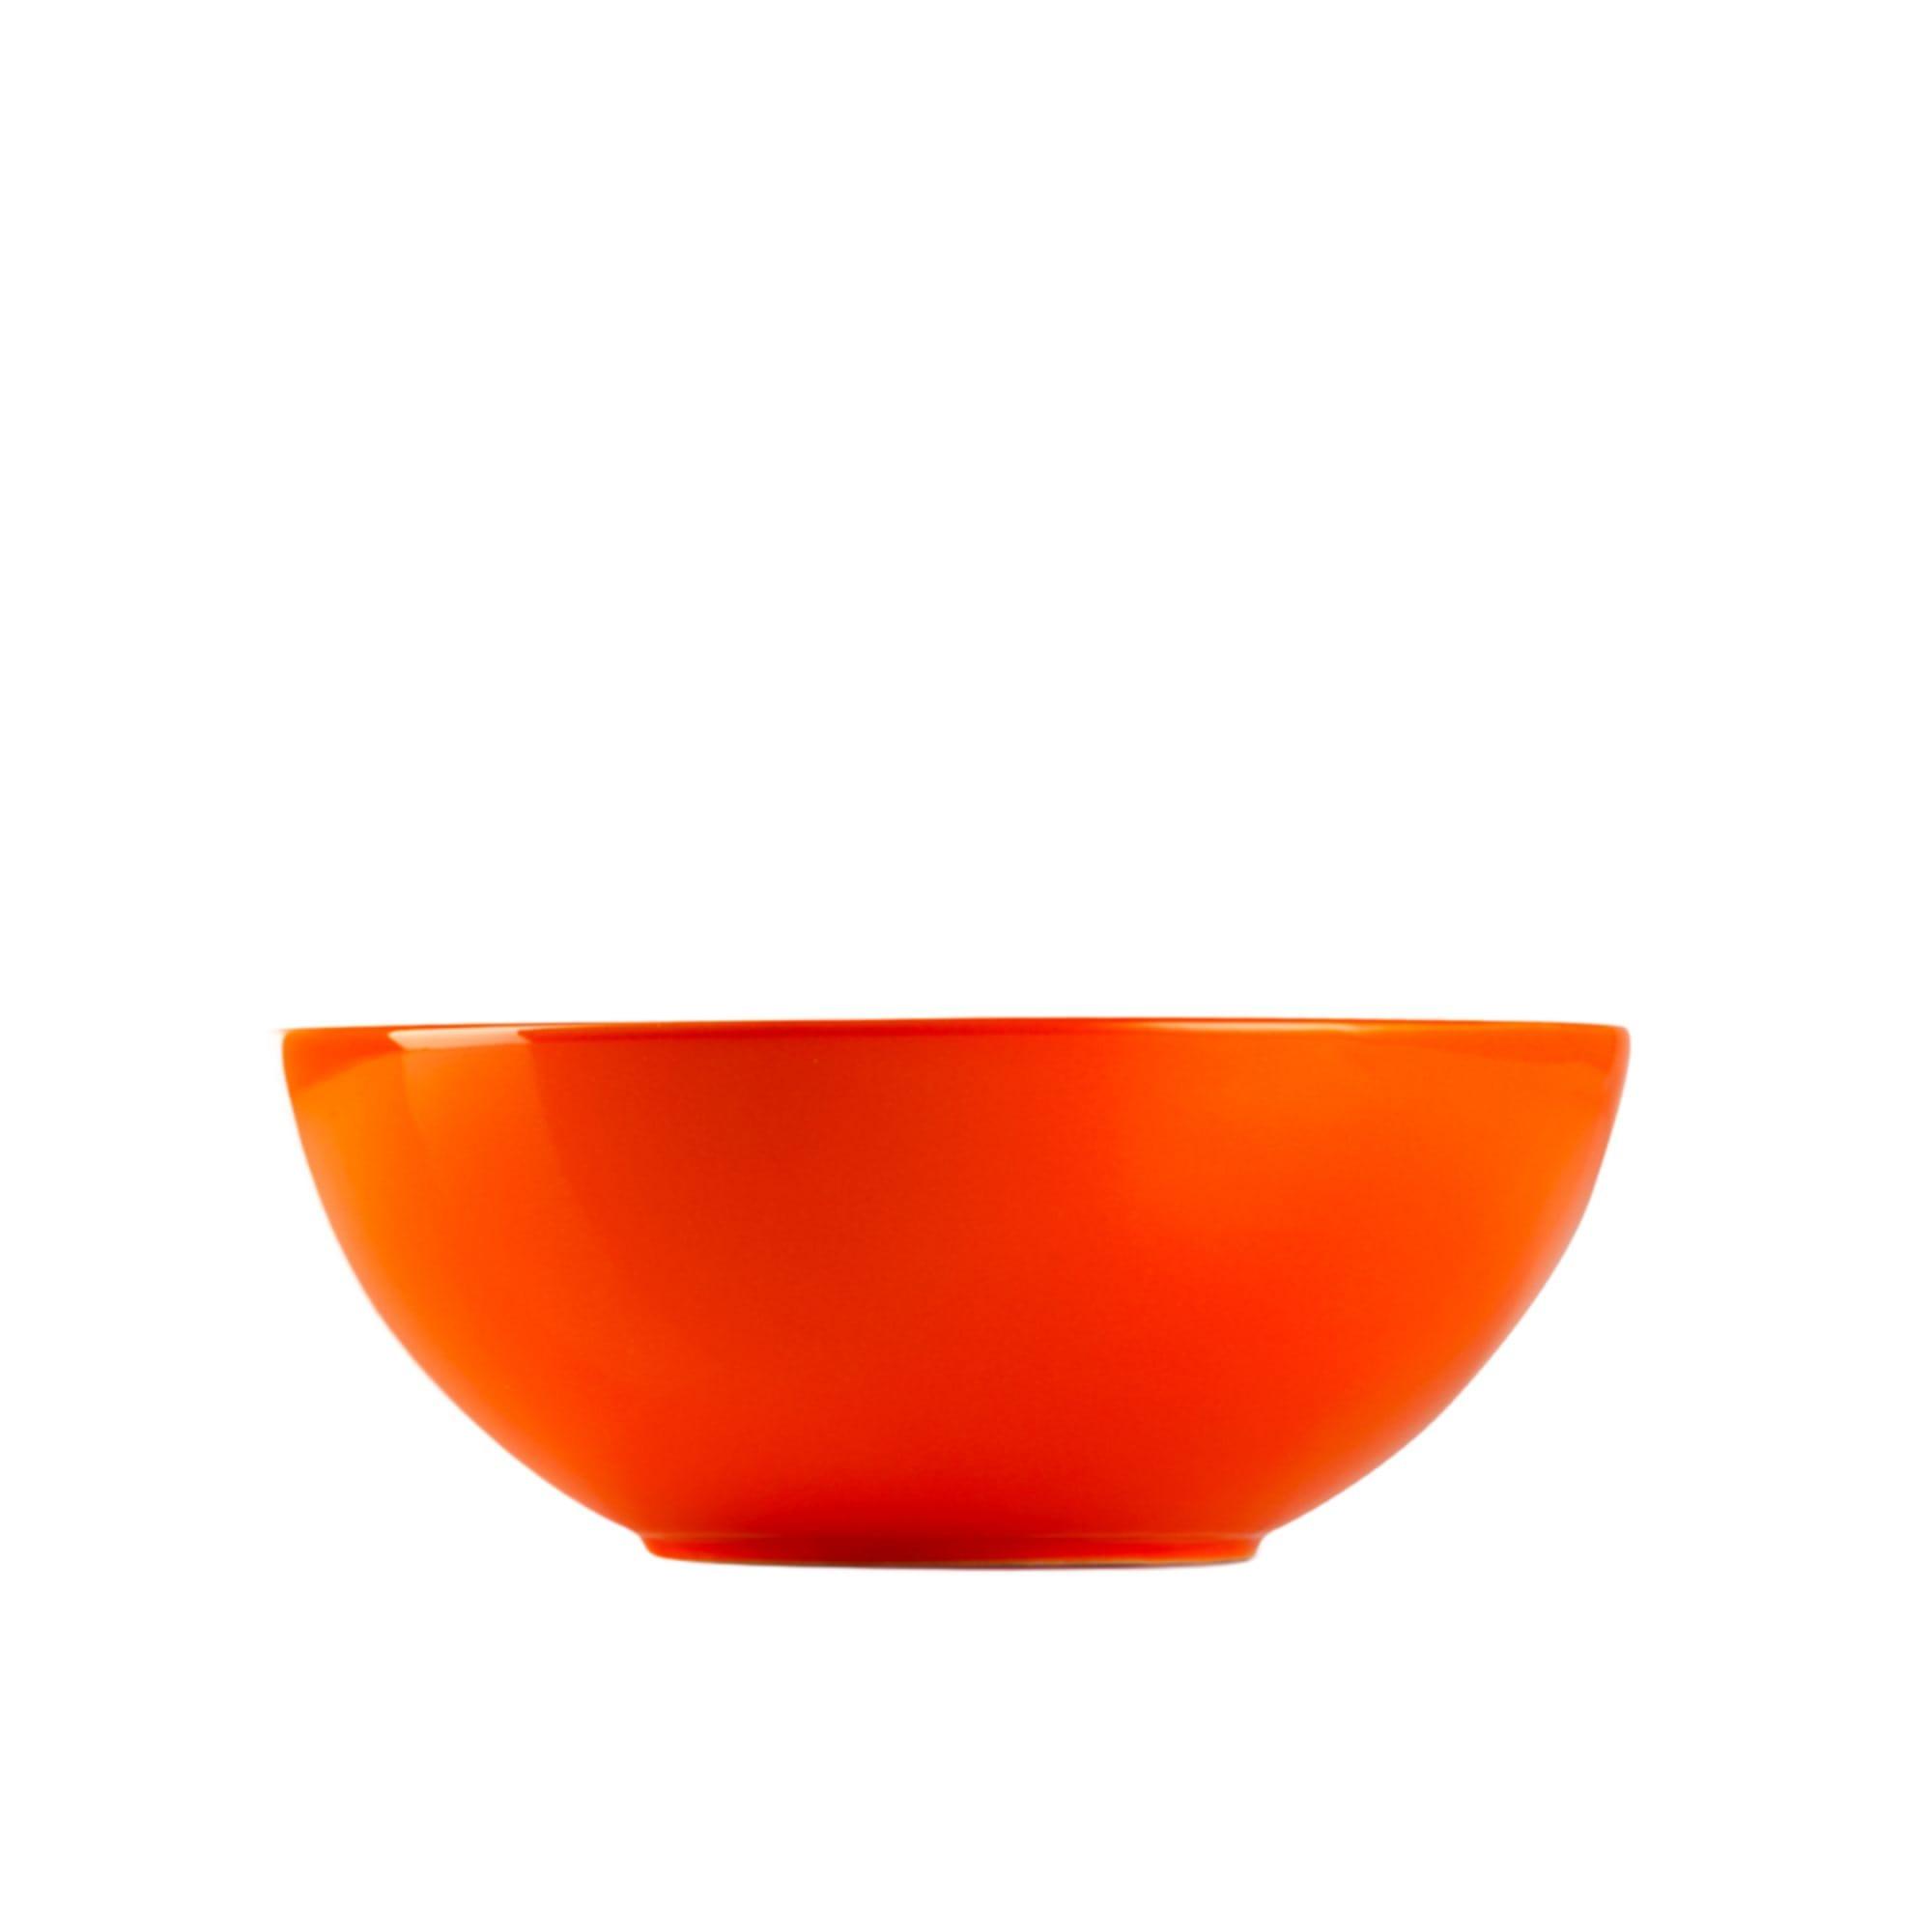 Le Creuset Stoneware Cereal Bowl Set of 4 Volcanic Image 4